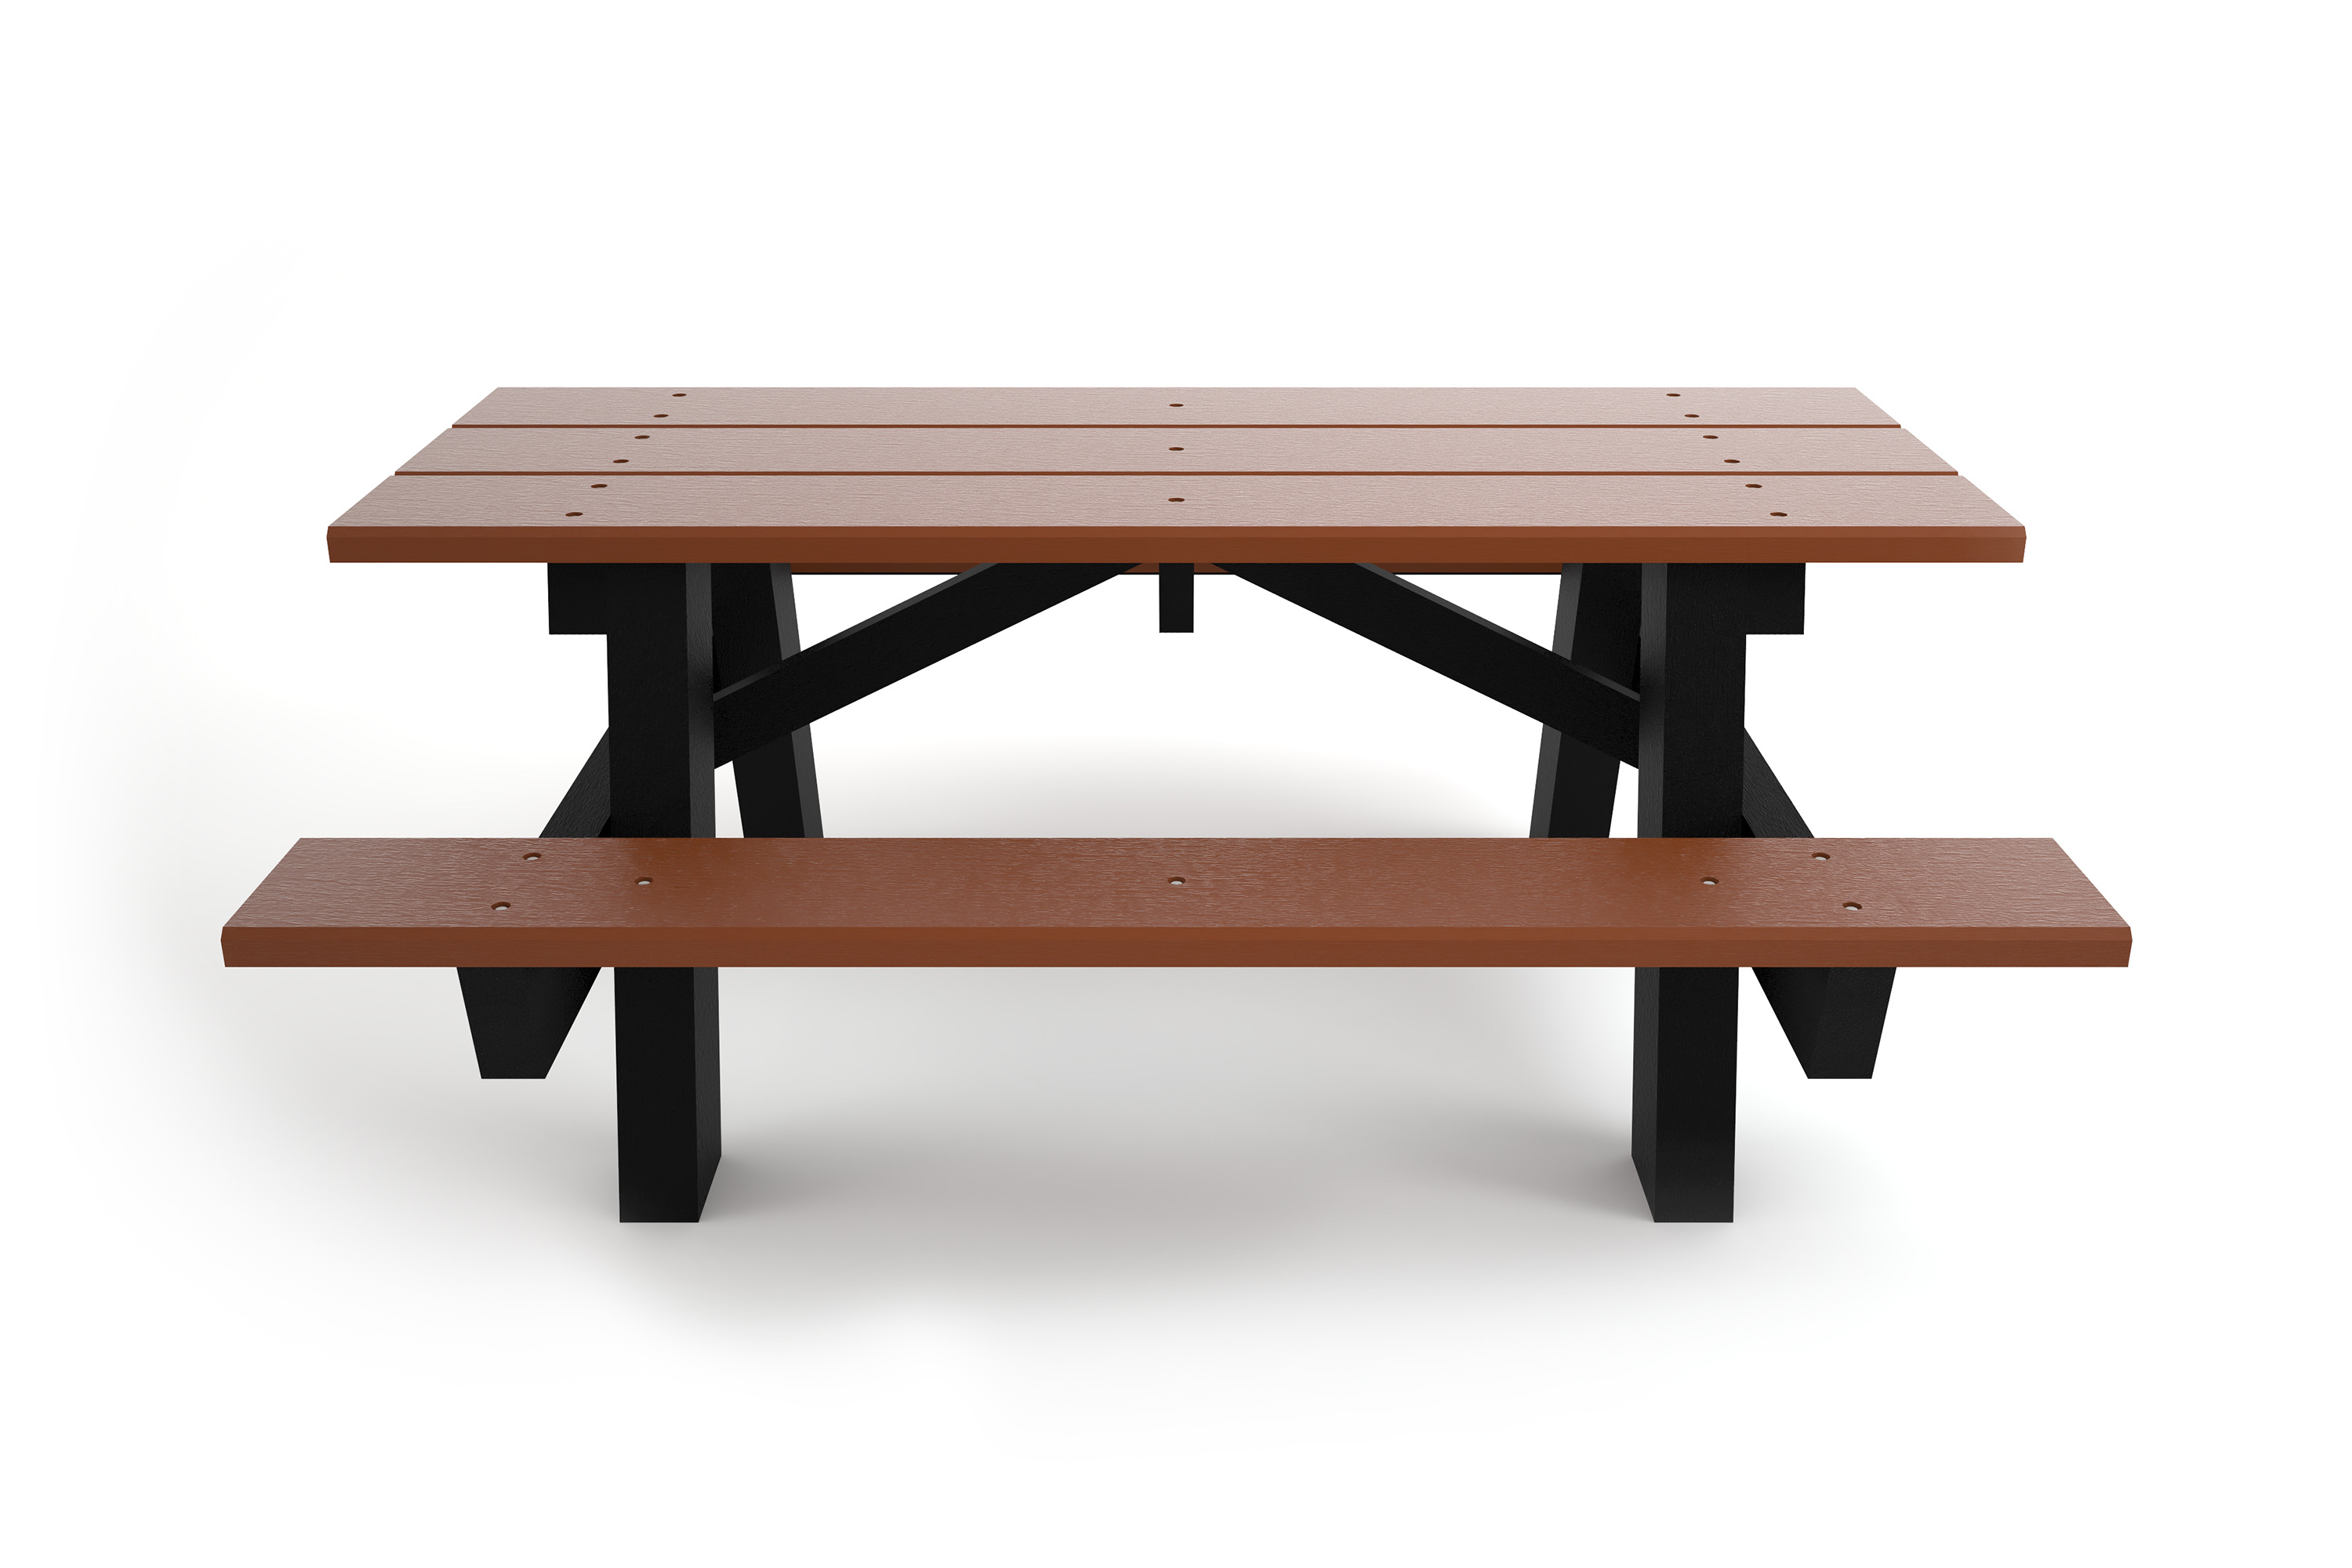 A Frame Table - Front BRO